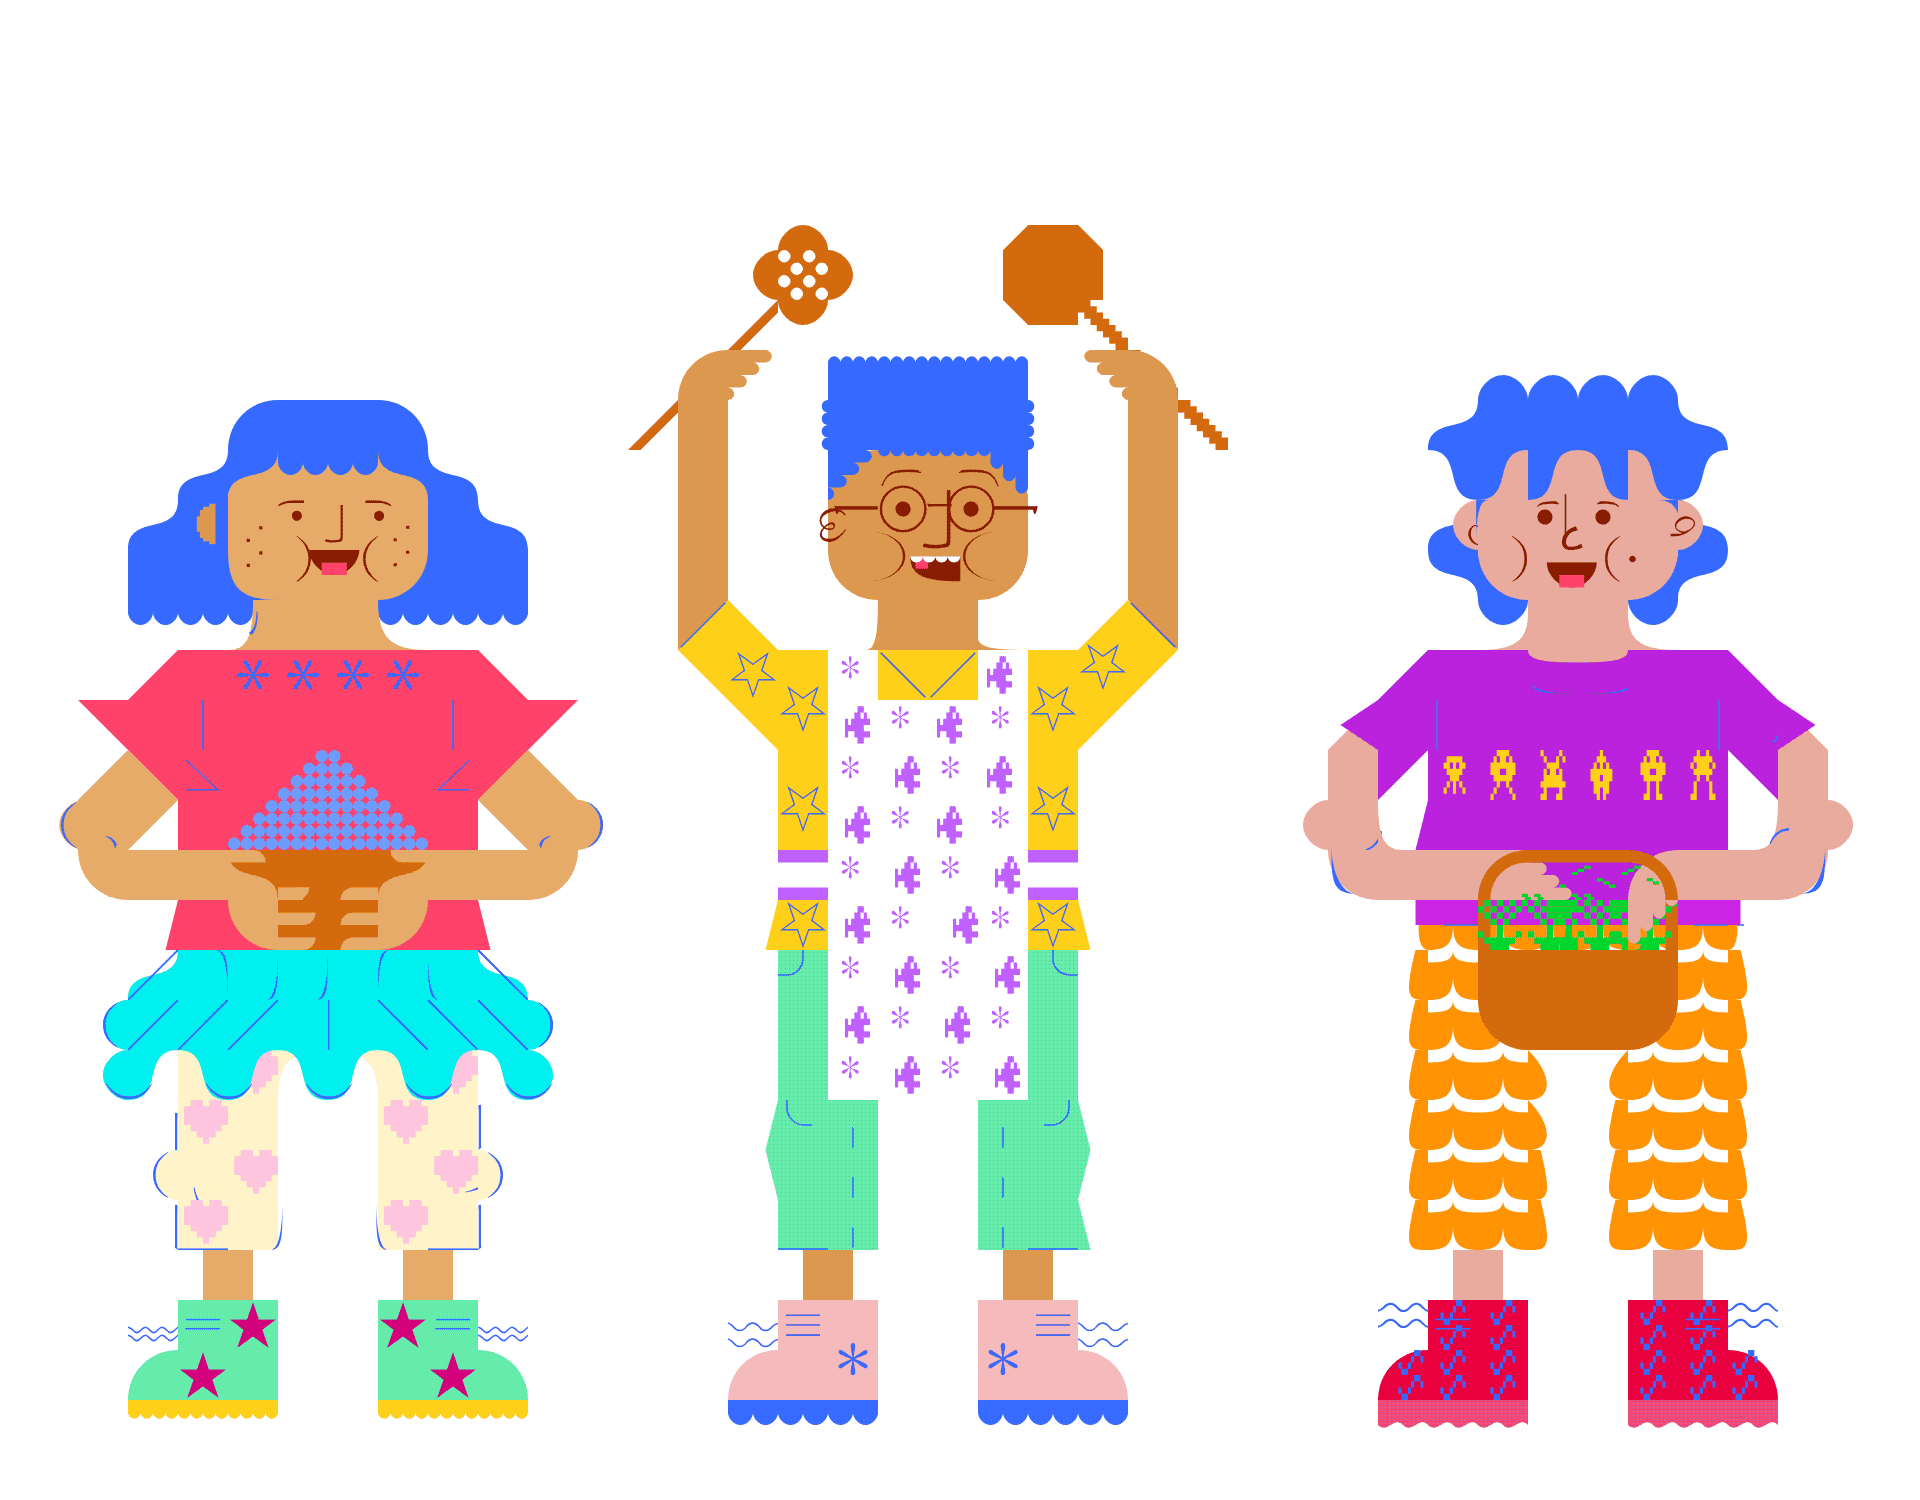 An illustration of three children facing the viewer. From left to right:
                    One child is holding a bowl of blueberries, the following child is holding cooking 
                    utencils over their head, and the last child is holding a basket filled with greens.
                    They are all wearing colorul outfits and have happy expressions on their faces.